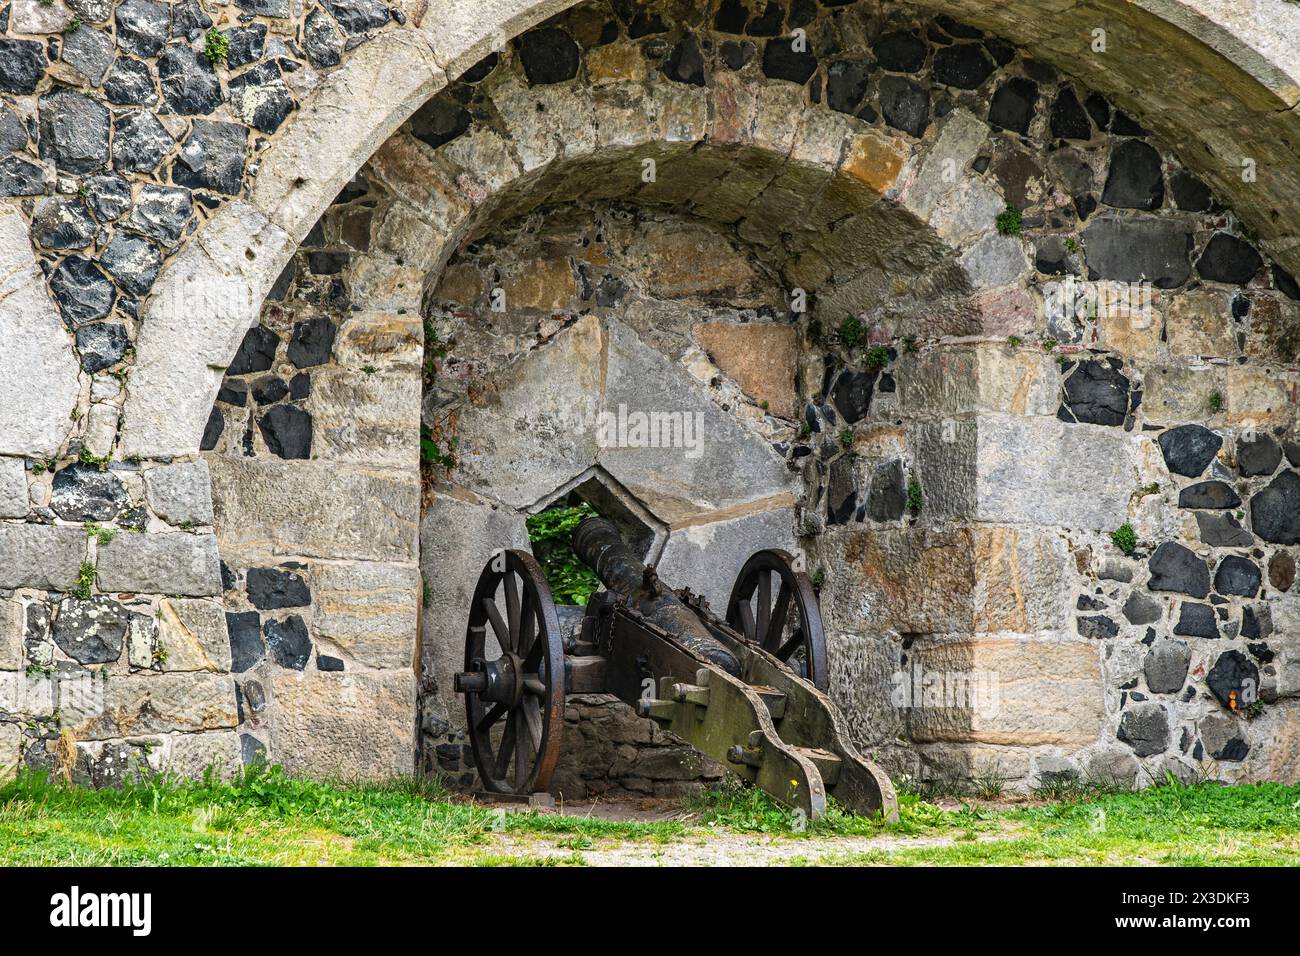 Historical artillery at the fortification wall of Stolpen Castle on the basalt hill of Stolpen, Saxony, Germany, for editorial use only. Stock Photo